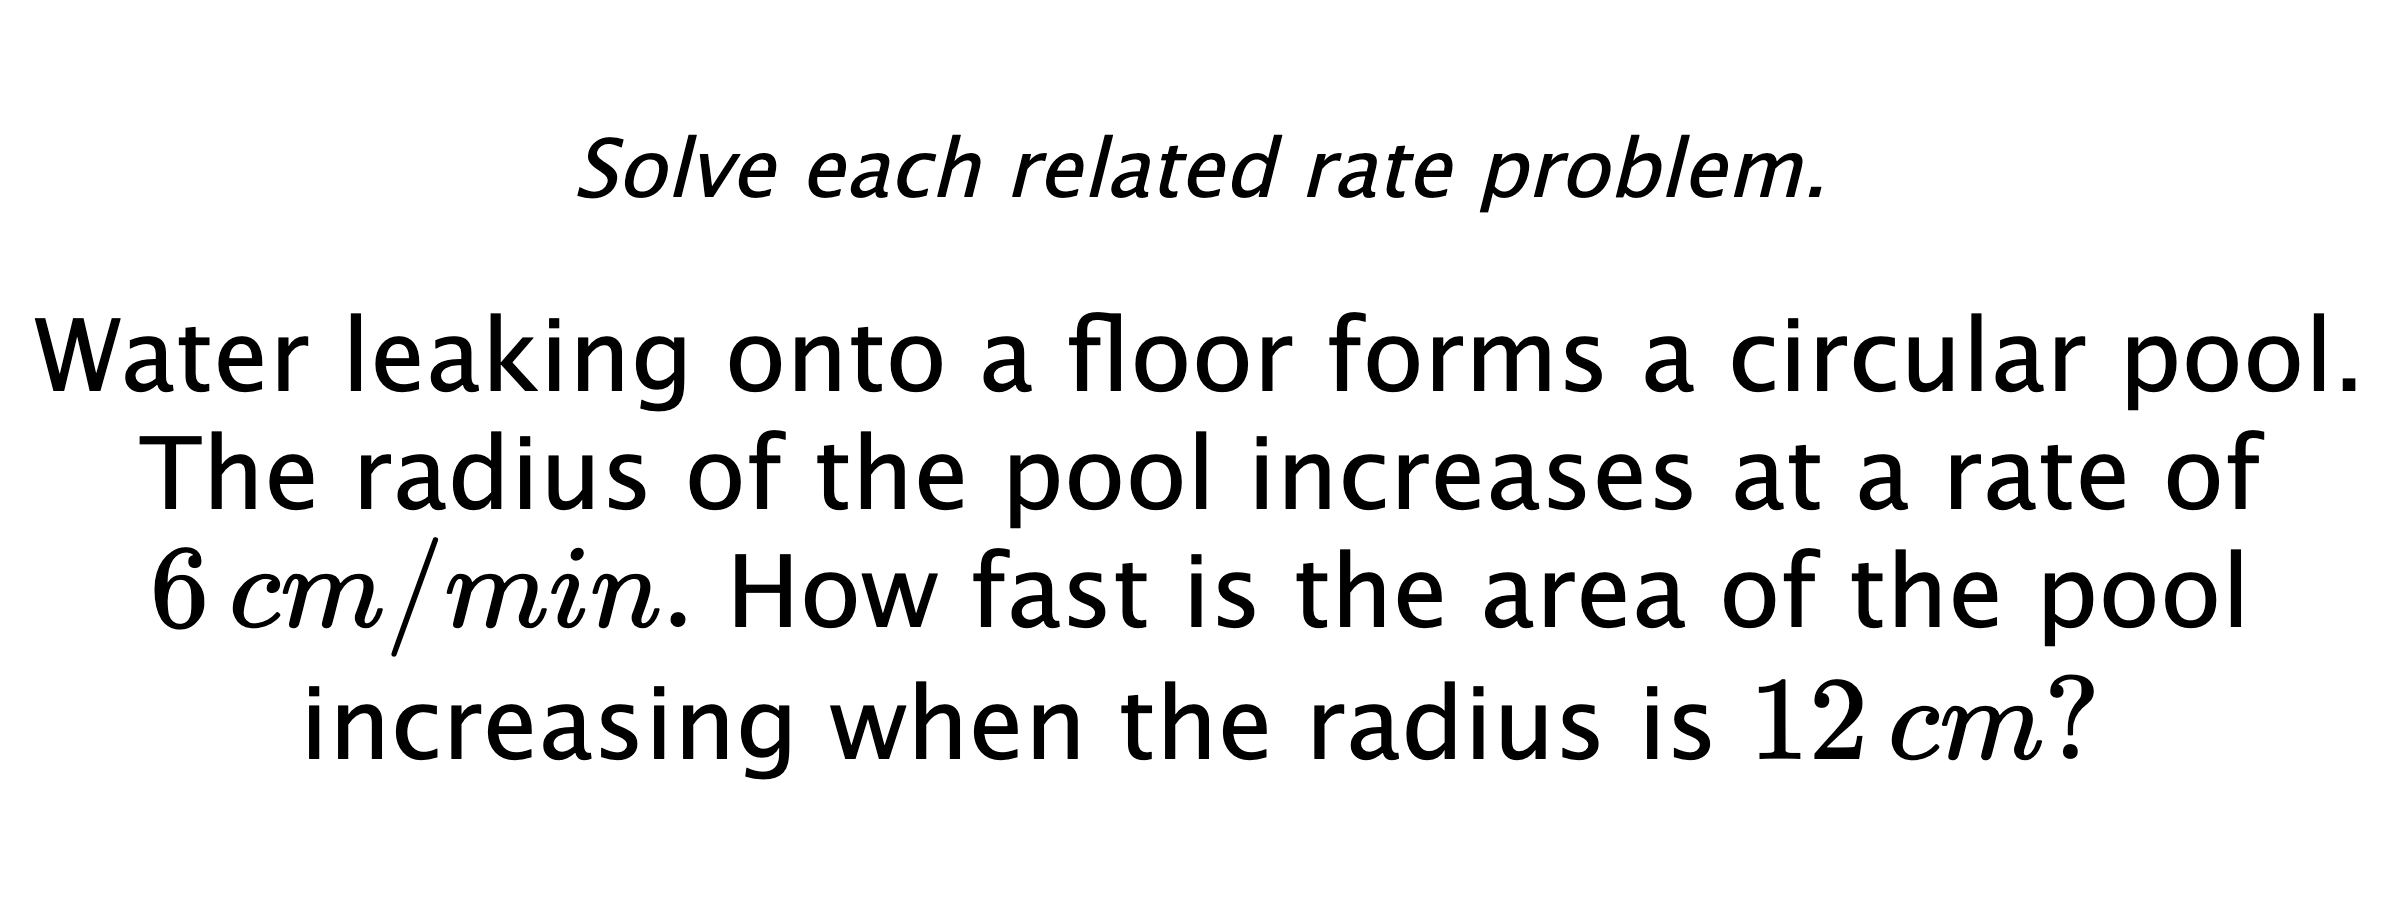 Solve each related rate problem. Water leaking onto a floor forms a circular pool. The radius of the pool increases at a rate of $6\,cm/min.$ How fast is the area of the pool increasing when the radius is $12\,cm?$